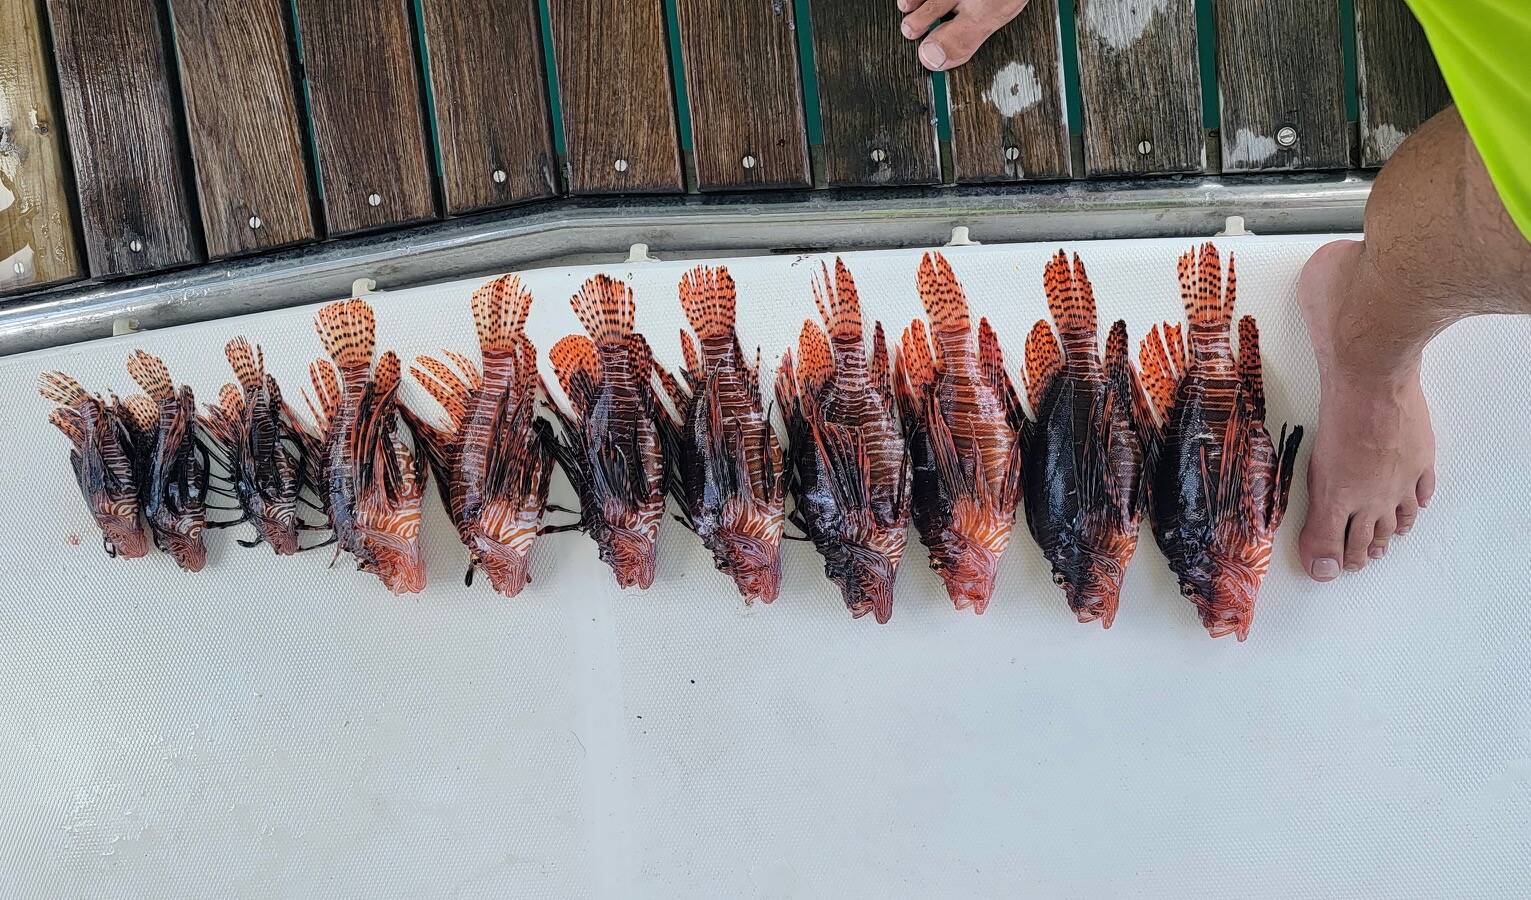 Photo provided
John Goebel speared lionfish as he sailed through the Caribbean.